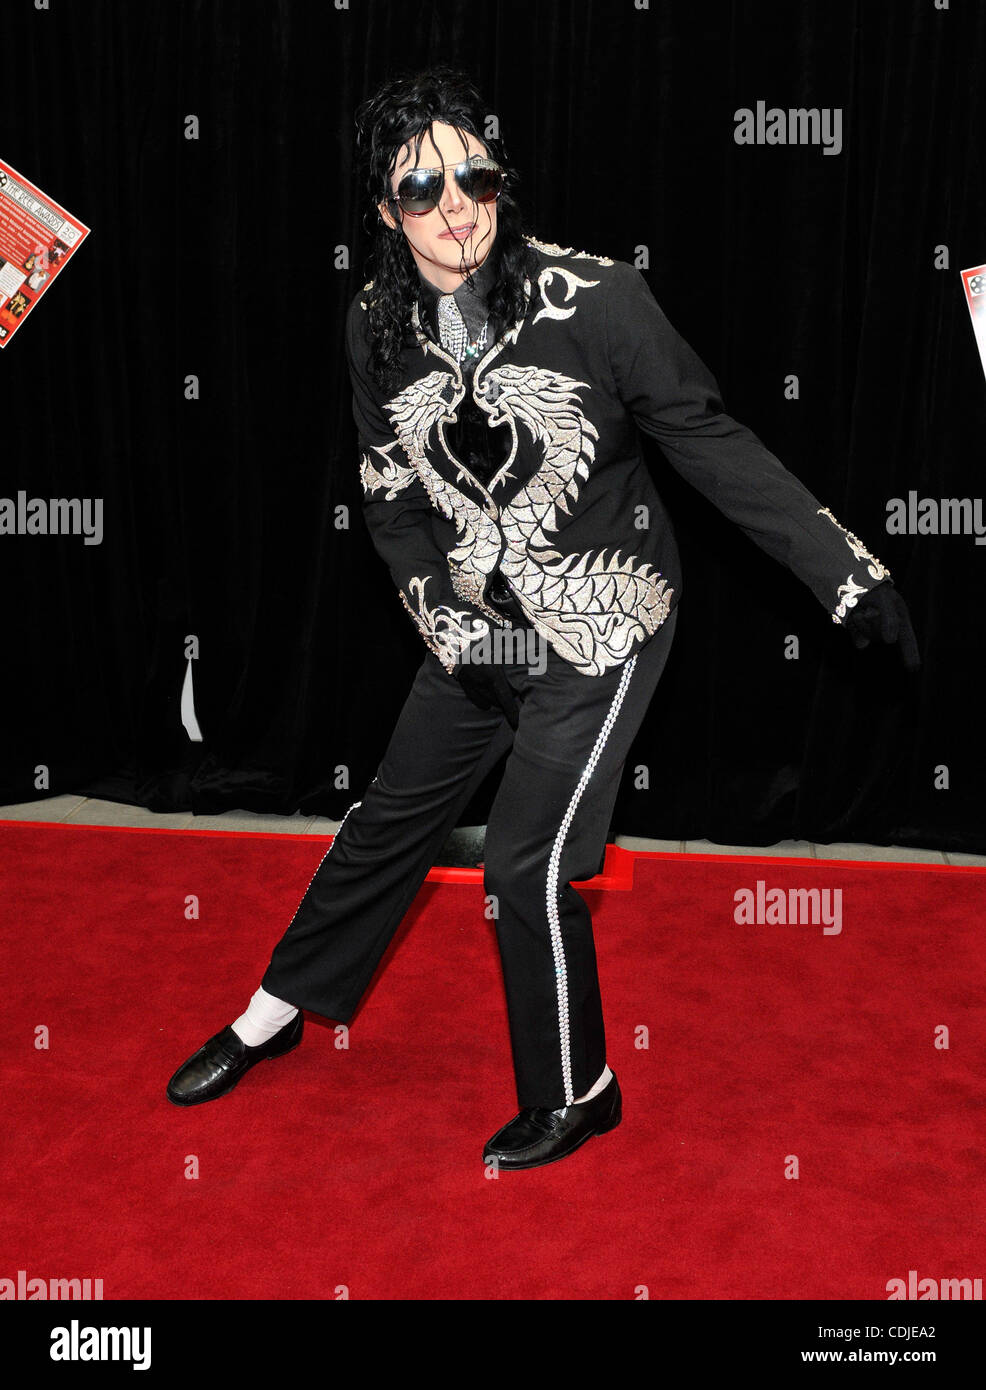 Feb. 24, 2011 - Las Vegas, Nevada, USA -  Celebrity impersonator  MICHAEL FIRESTONE as Michael Jackson arrives at the 20th Annual The Reel Awards featuring celebrity impersonators at the Golden Nugget Hotel & Casino on Thursday, February 24, 2011 in Las Vegas, Nevada. (Credit Image: © David Becker/Z Stock Photo